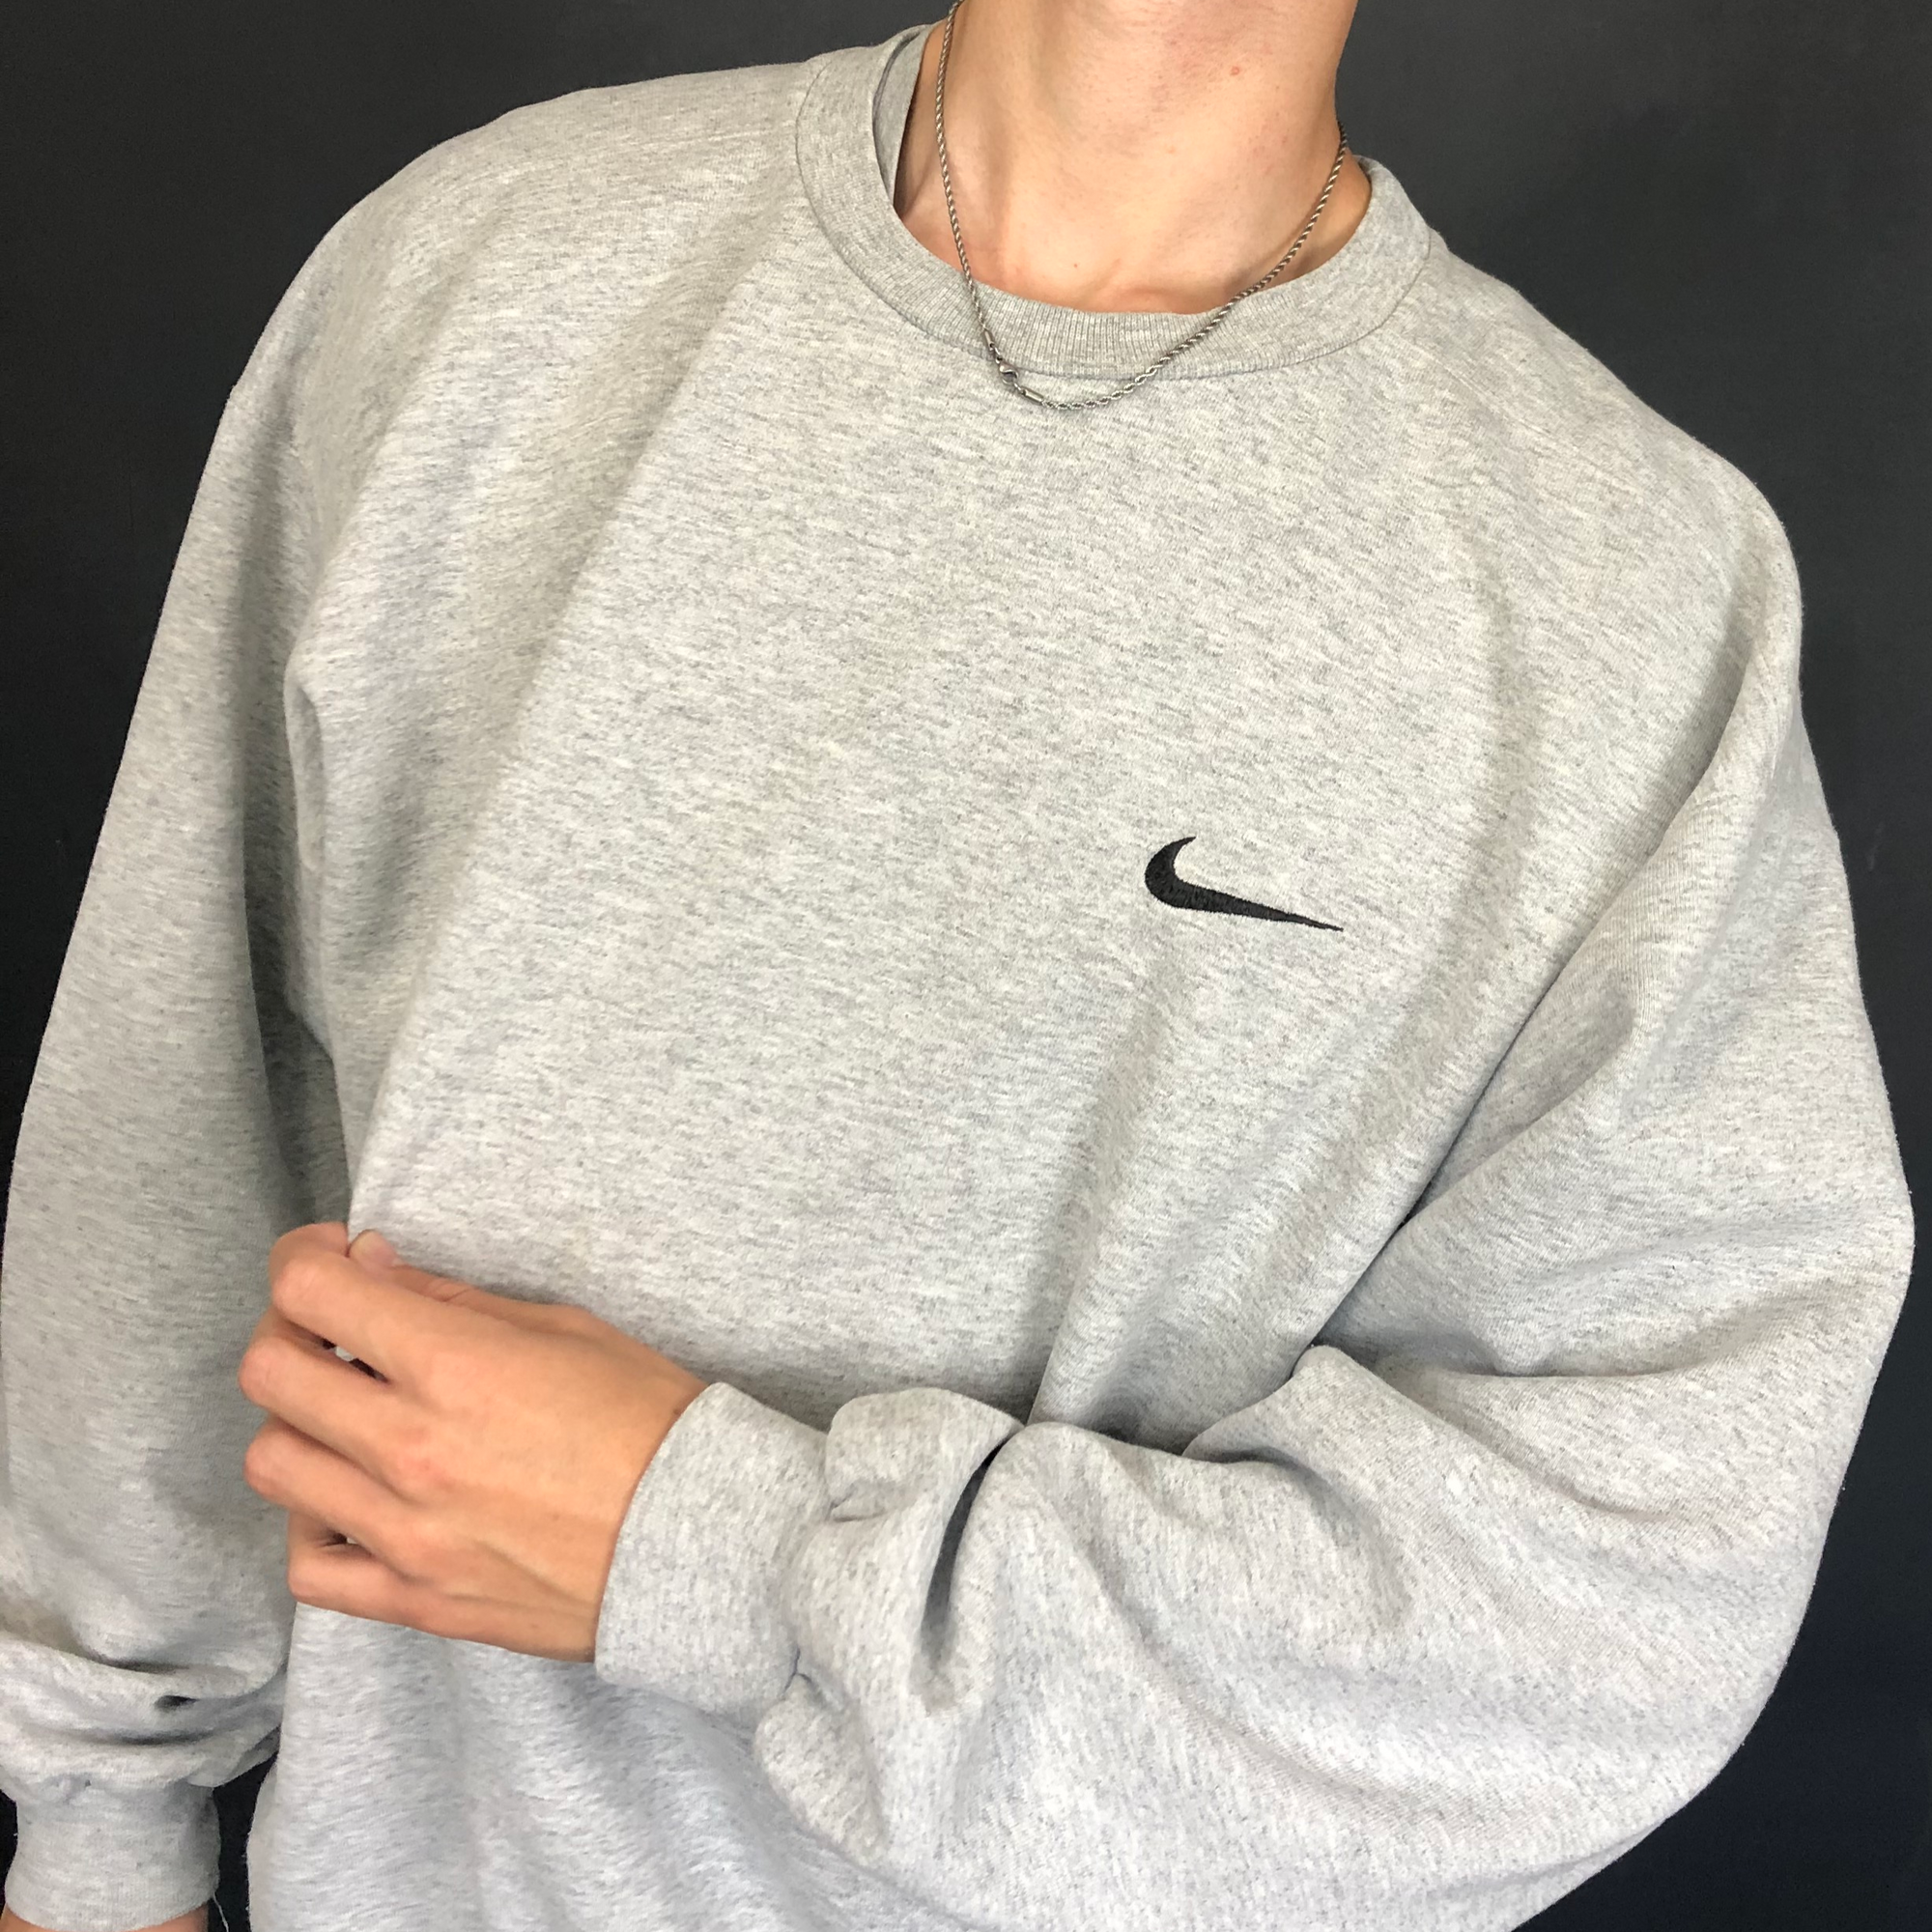 VINTAGE NIKE SWEATSHIRT WITH EMBROIDERED SWOOSH - Vintique Clothing